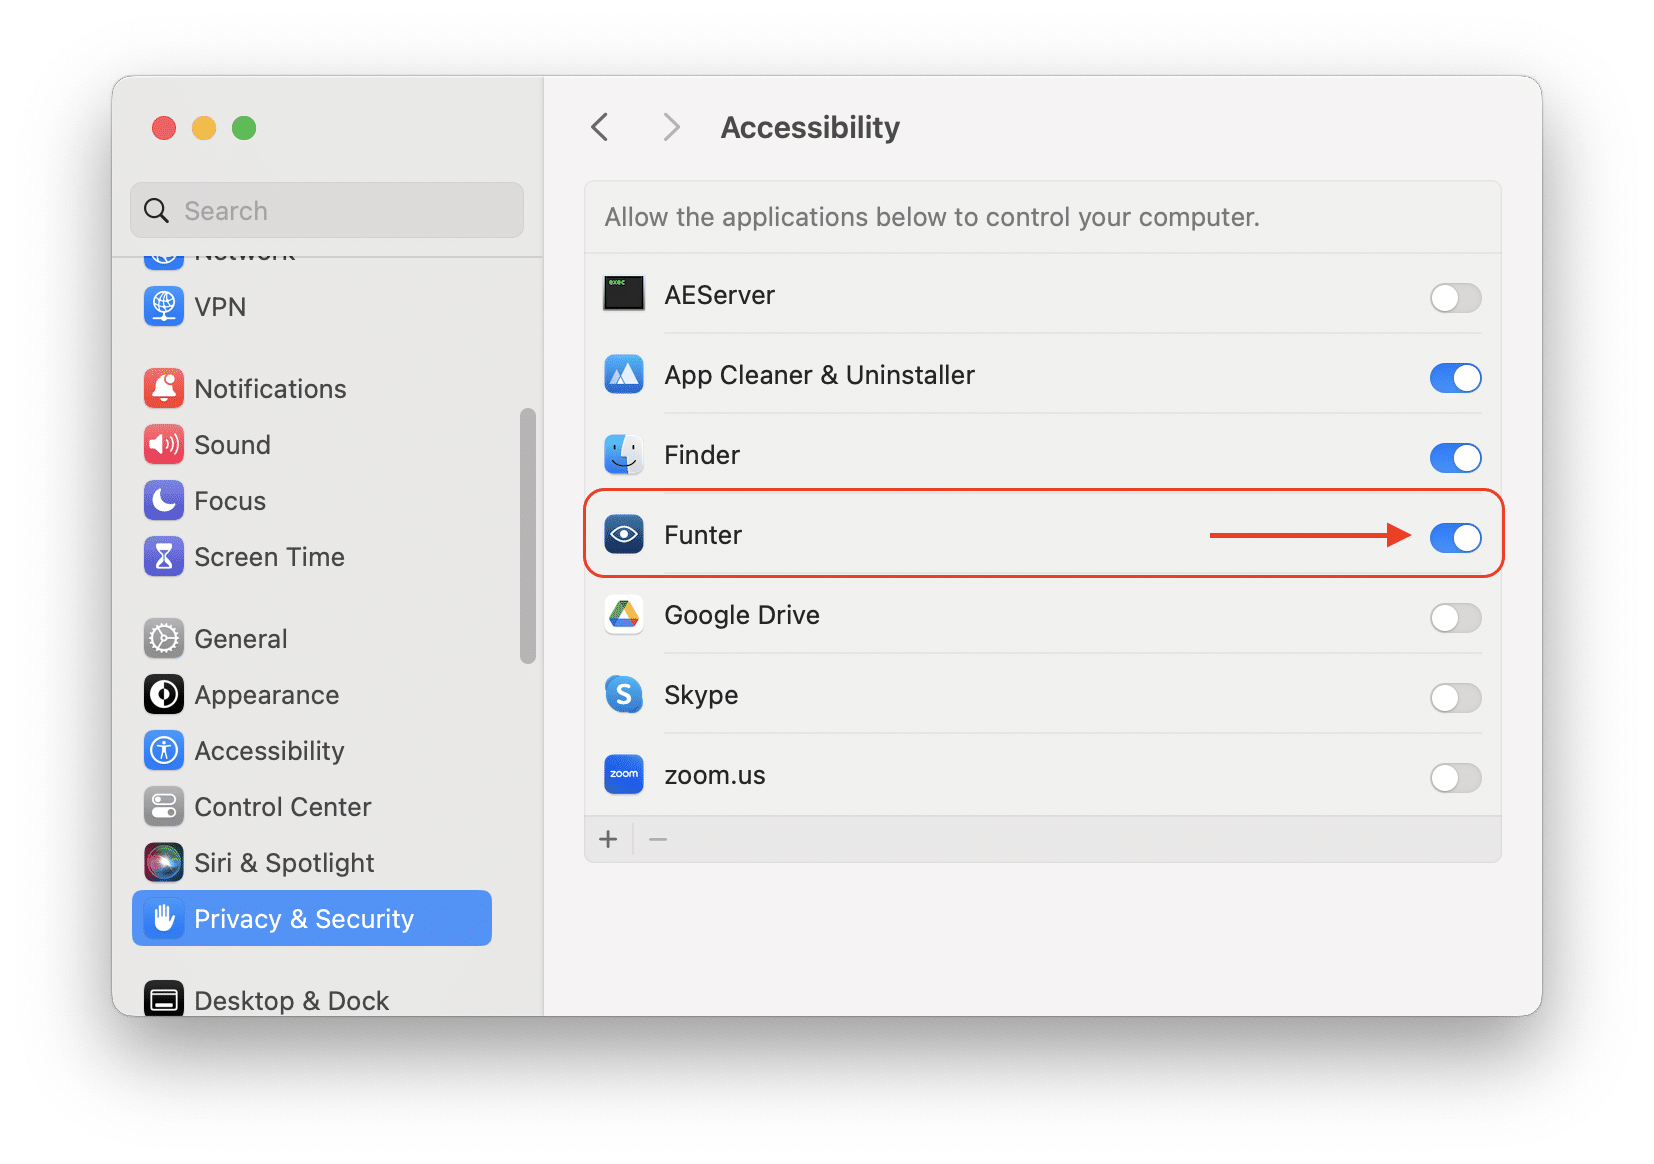 System Settings showing Funter in Accessibility section